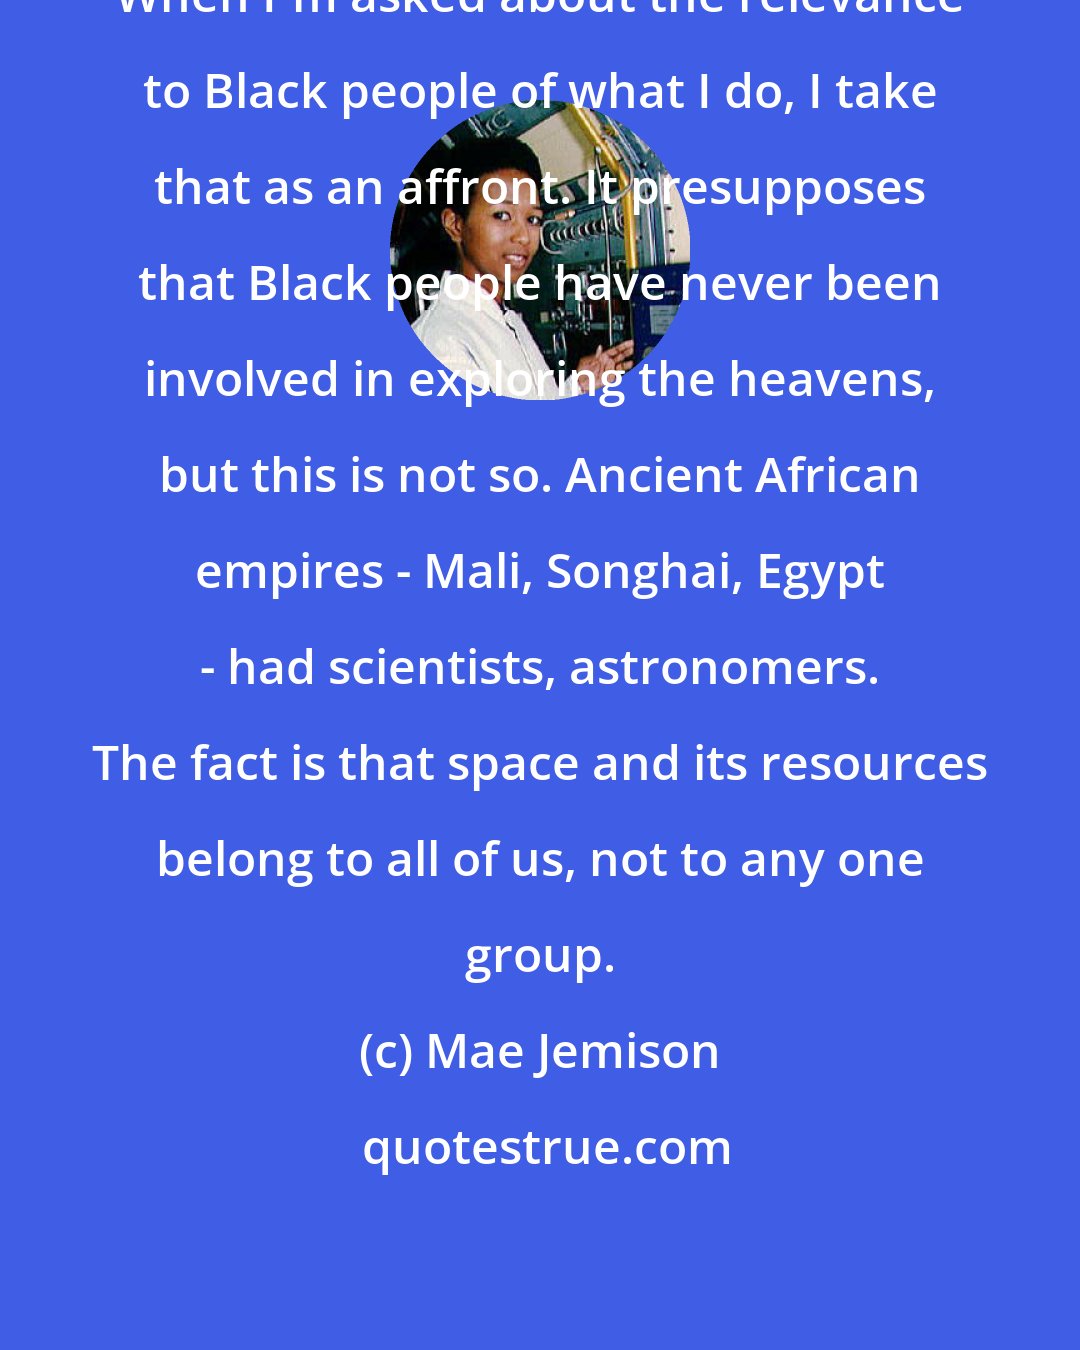 Mae Jemison: When I'm asked about the relevance to Black people of what I do, I take that as an affront. It presupposes that Black people have never been involved in exploring the heavens, but this is not so. Ancient African empires - Mali, Songhai, Egypt - had scientists, astronomers. The fact is that space and its resources belong to all of us, not to any one group.